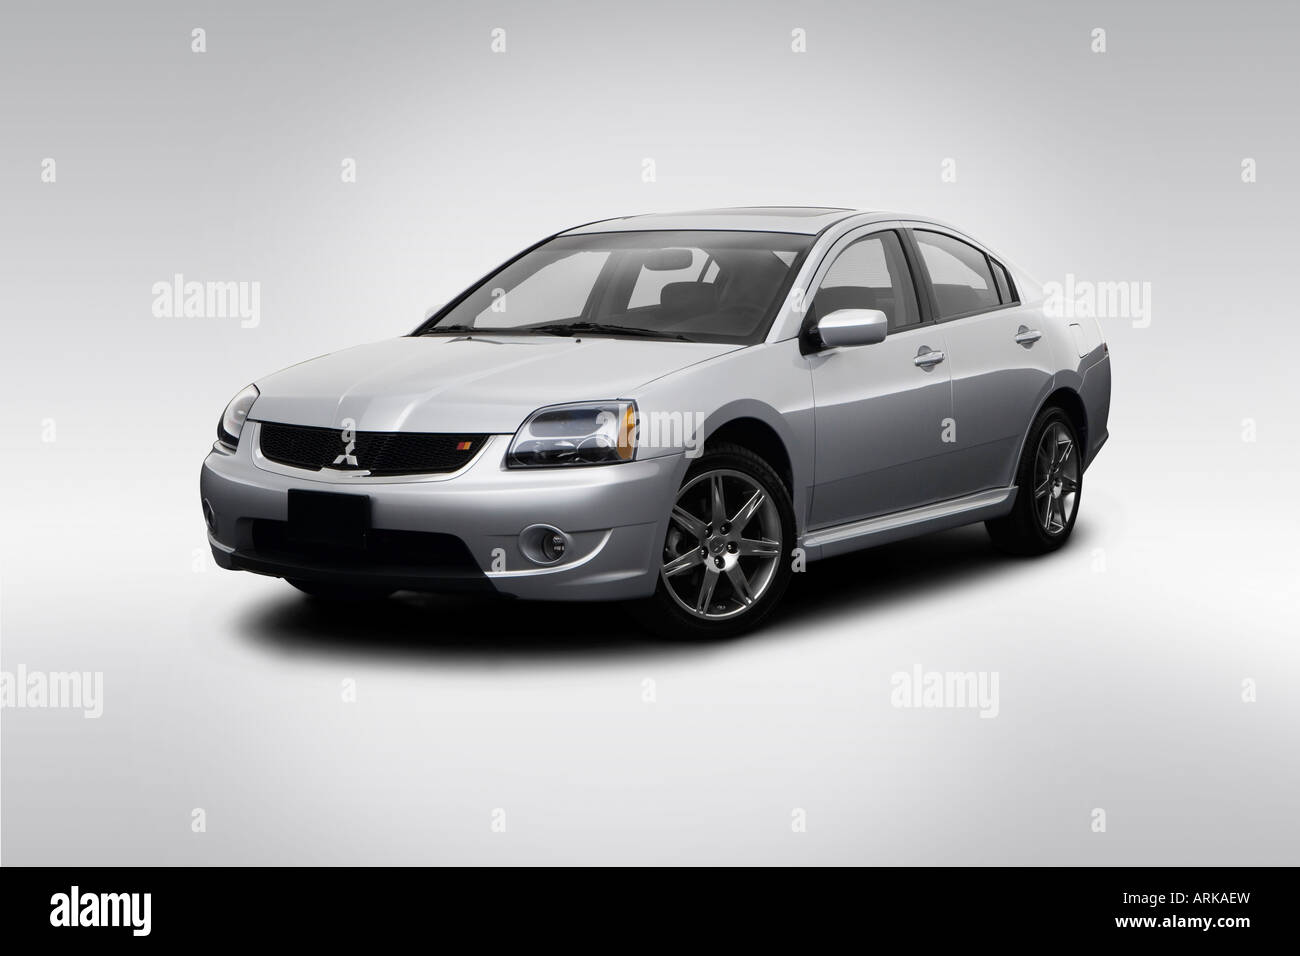 2008 Mitsubishi Galant Ralliart in Silver - Front angle view Stock Photo -  Alamy